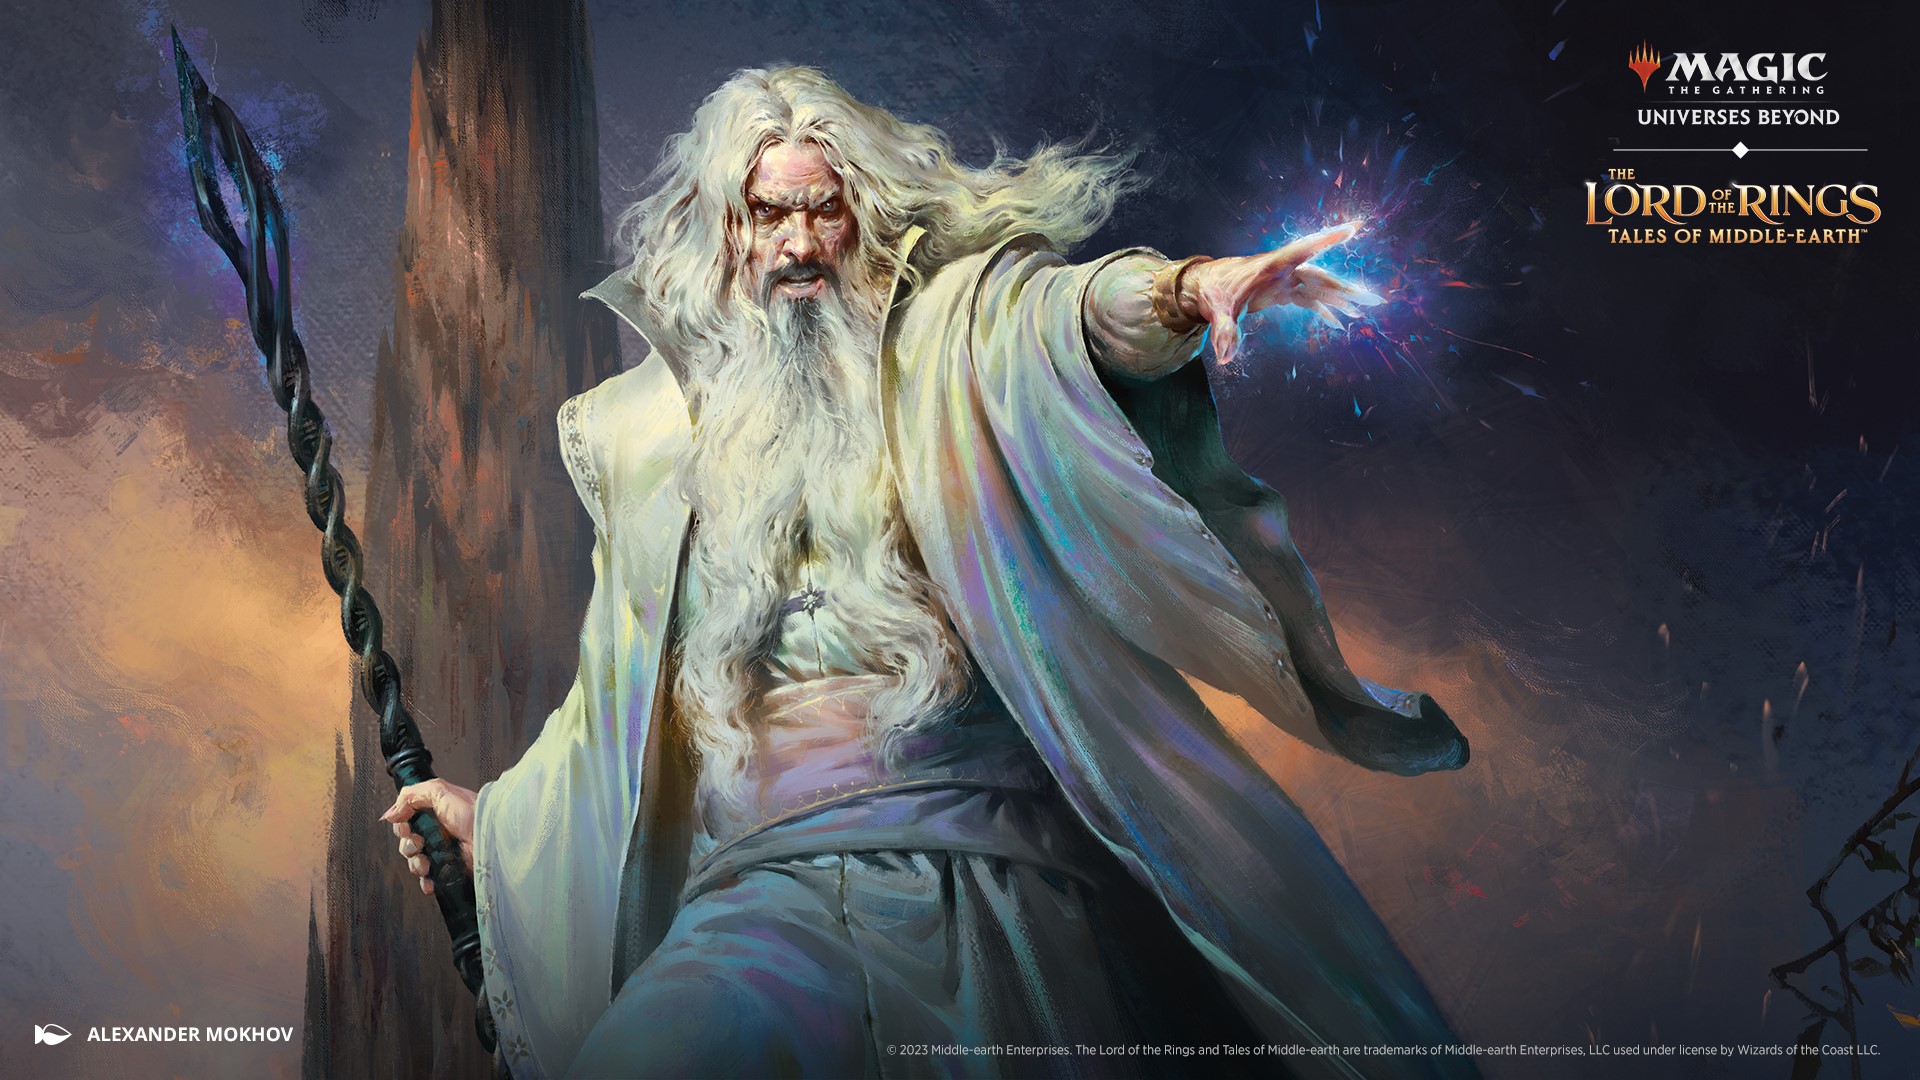 Saruman, Ioreth, And More The Lord of the Rings: Tales of Middle-earth Previews From Wednesday, May 31